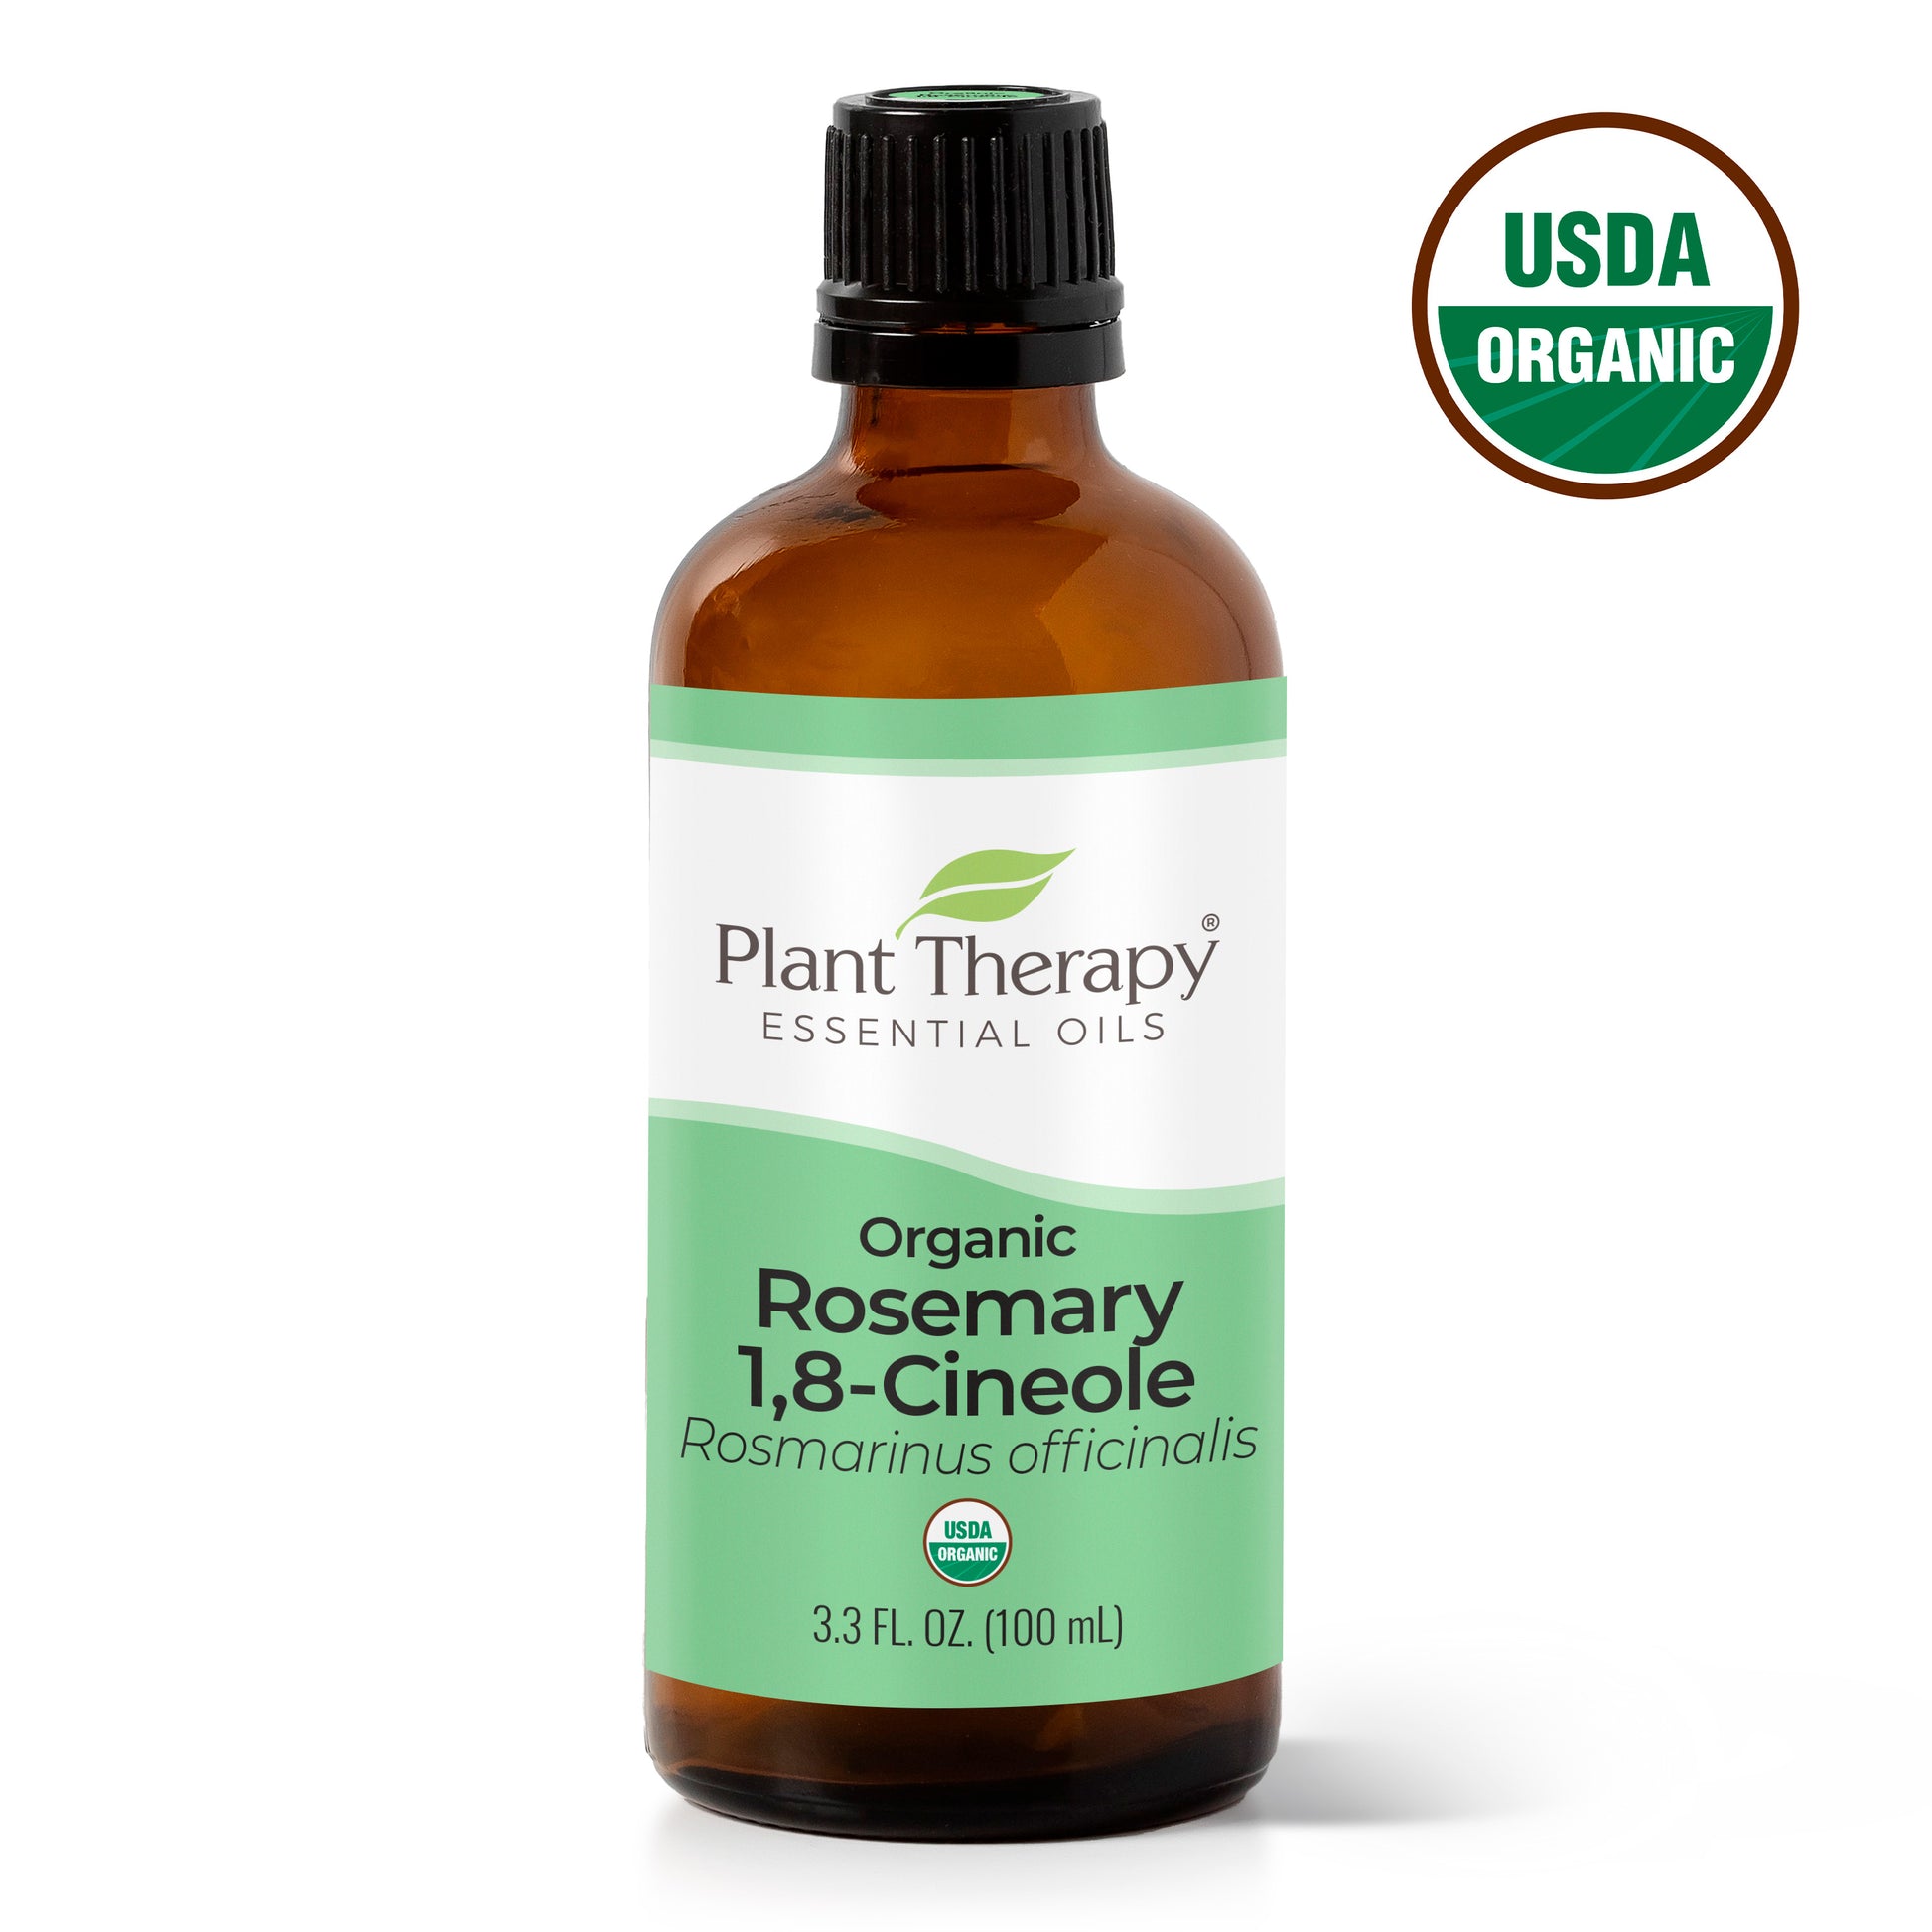 Organic Rosemary 1,8-Cineole Essential Oil – Plant Therapy